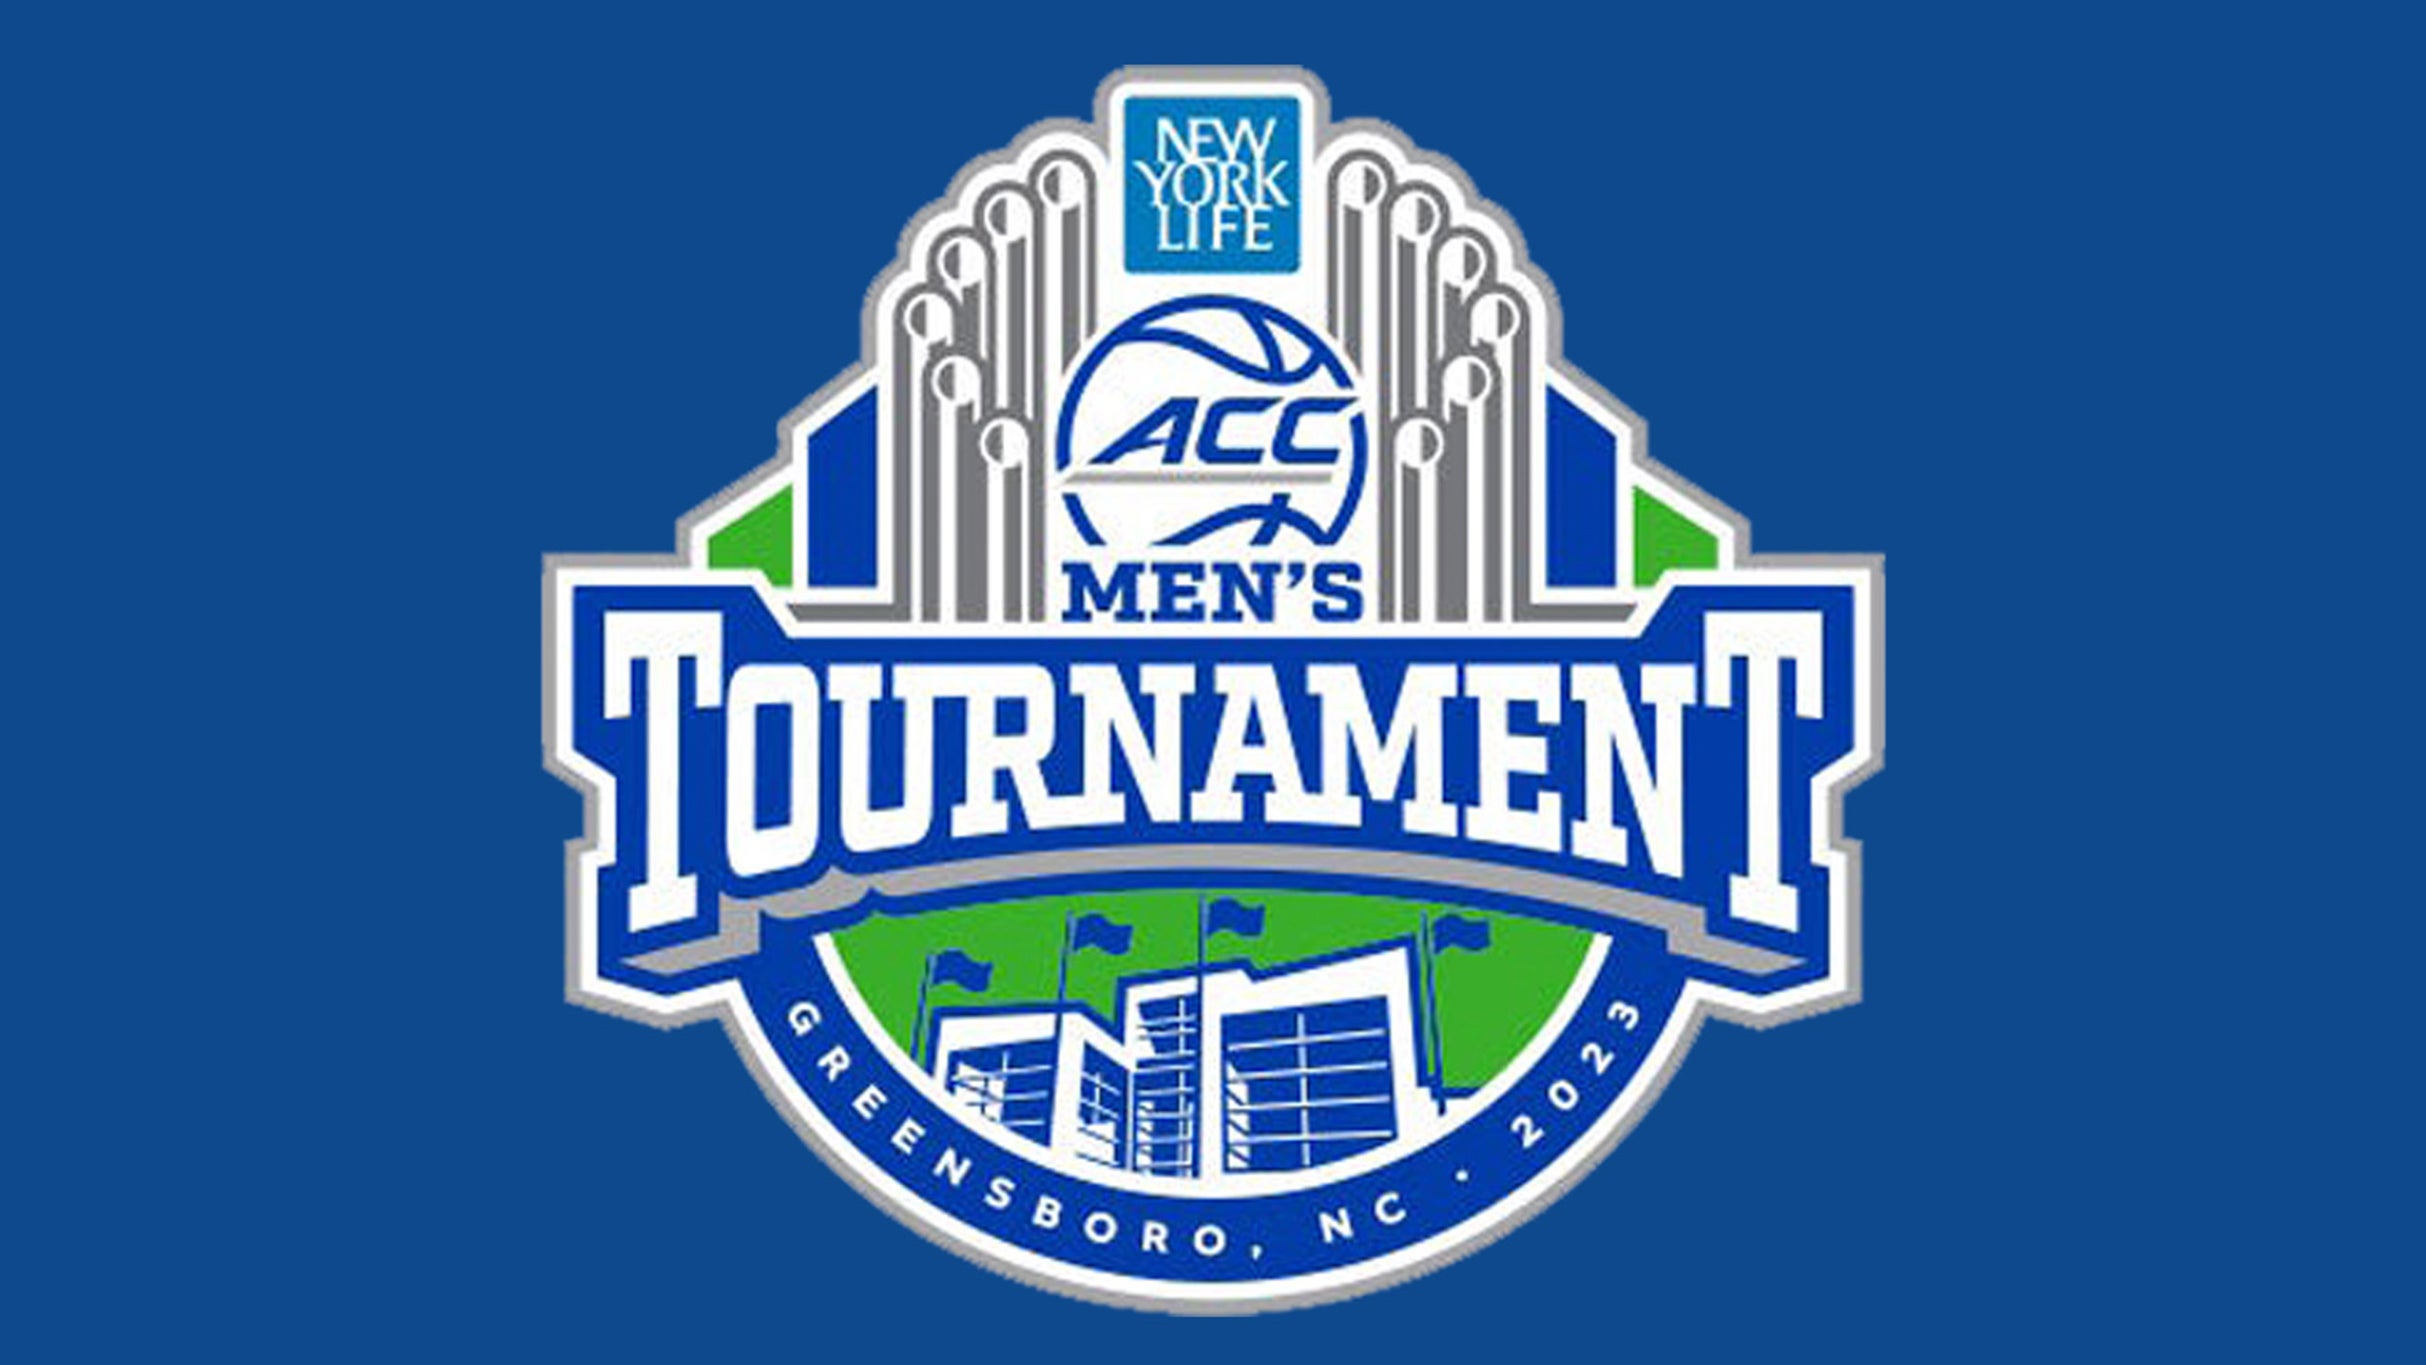 2023 New York Life ACC Men's Basketball Tournament Session 4 in Greensboro promo photo for Resale Onsale presale offer code